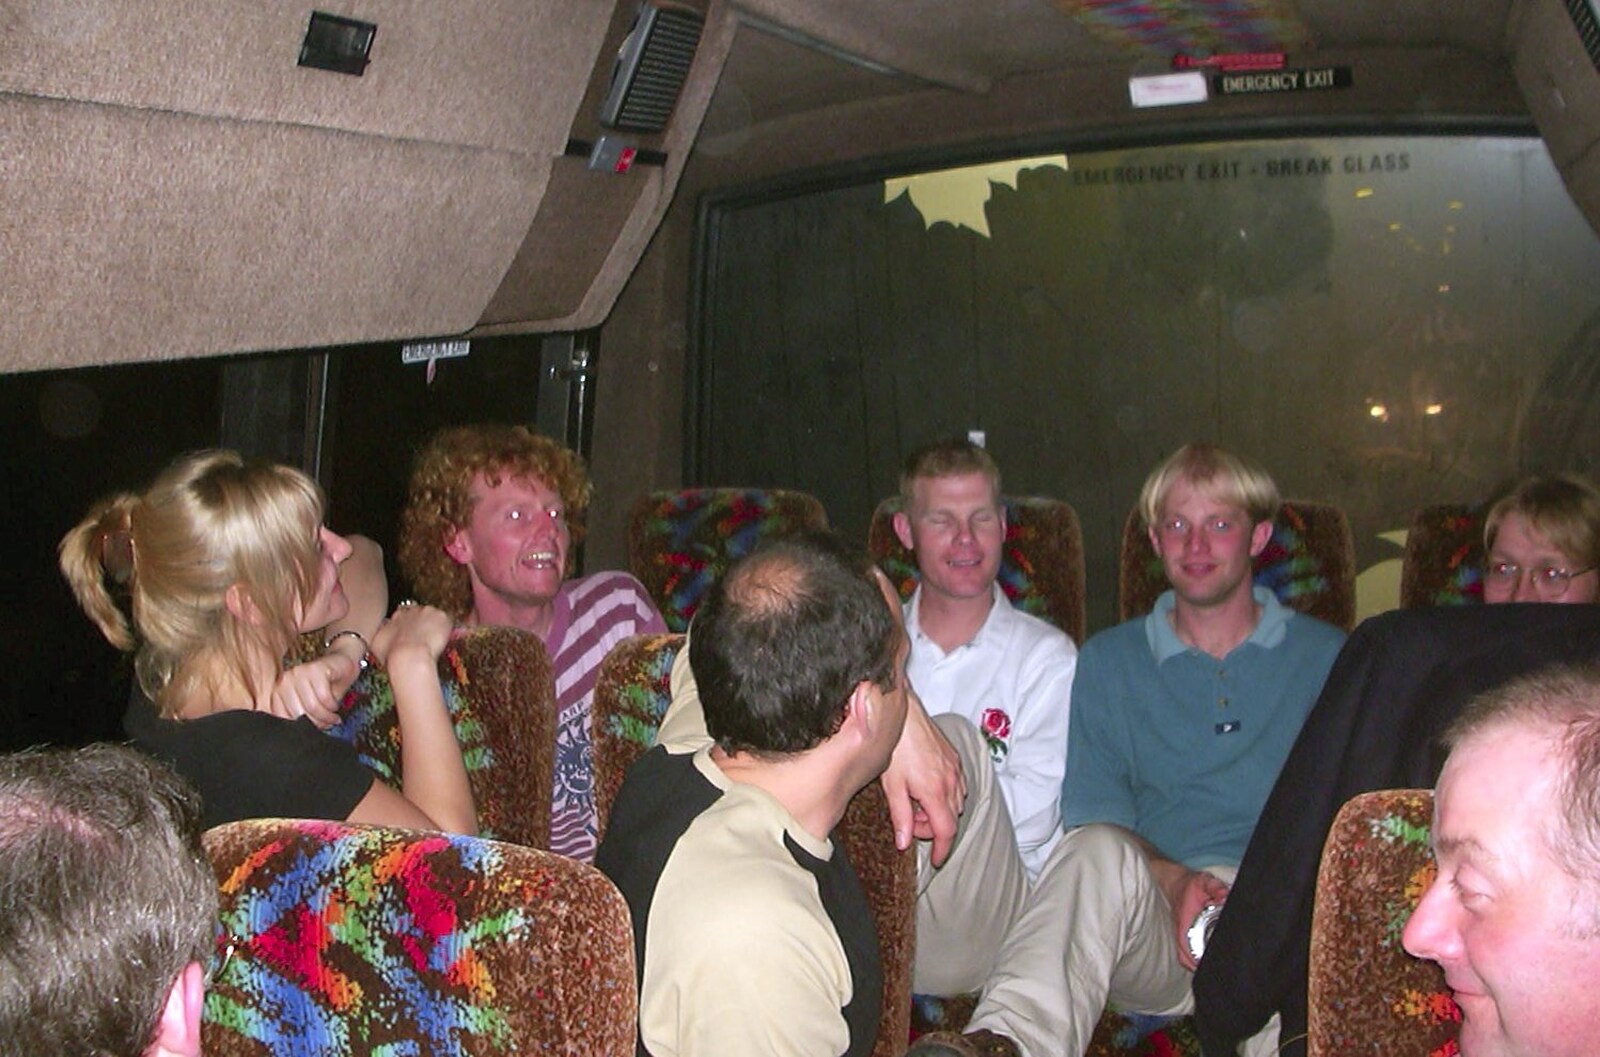 More bus shenanigans from The Norwich Beer Festival, St. Andrew's Hall, Norwich - 24th October 2001